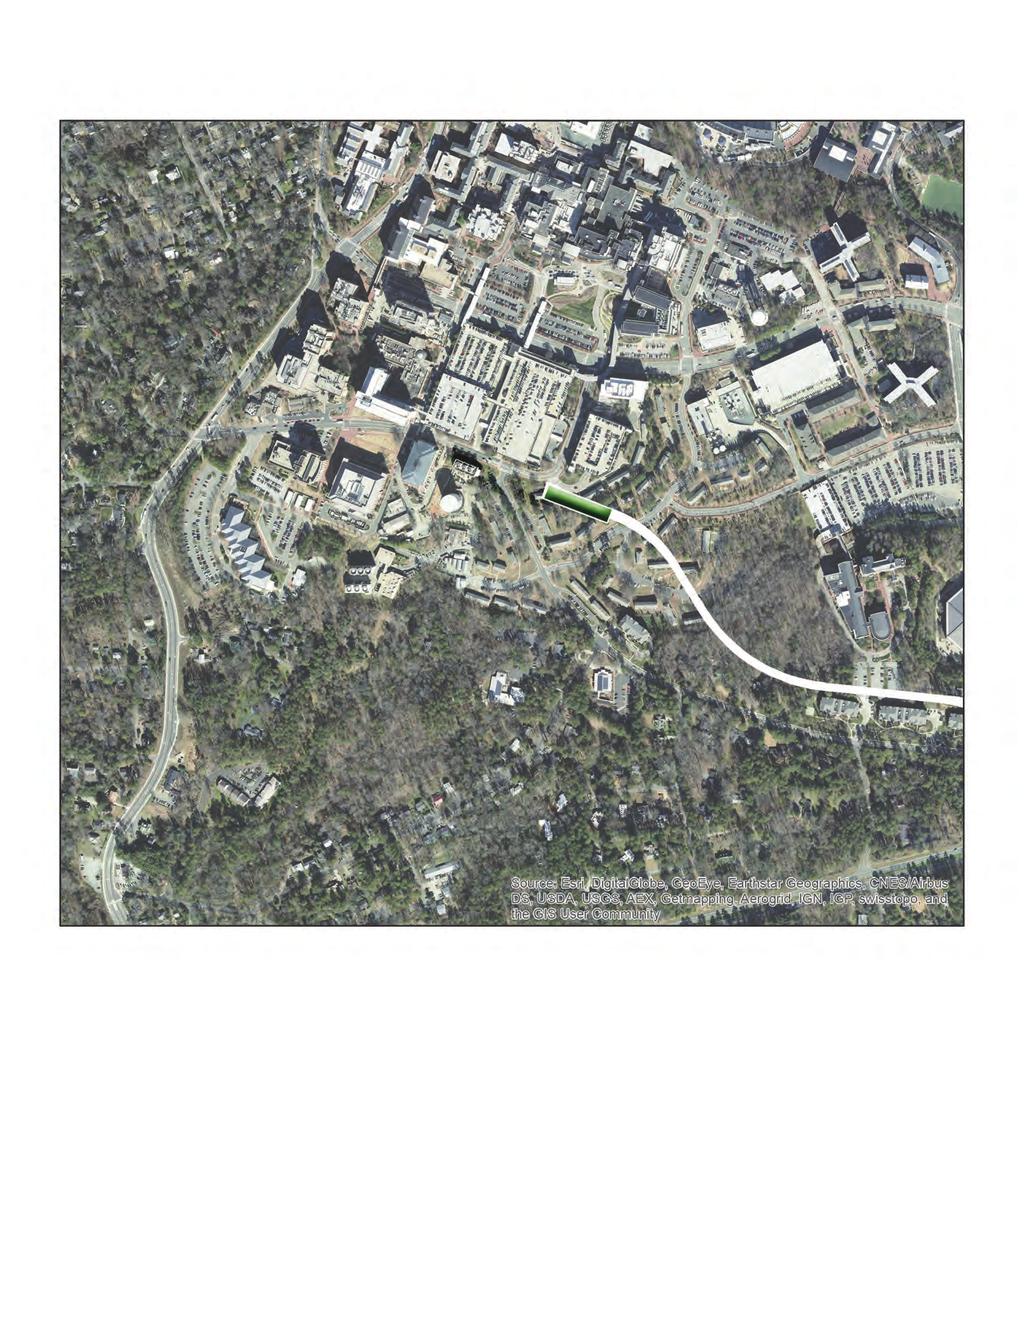 STATION DEVELOPMENT CONCEPT The image shown here depicts the University of North Carolina at Chapel Hill s extensive hospital and research area.